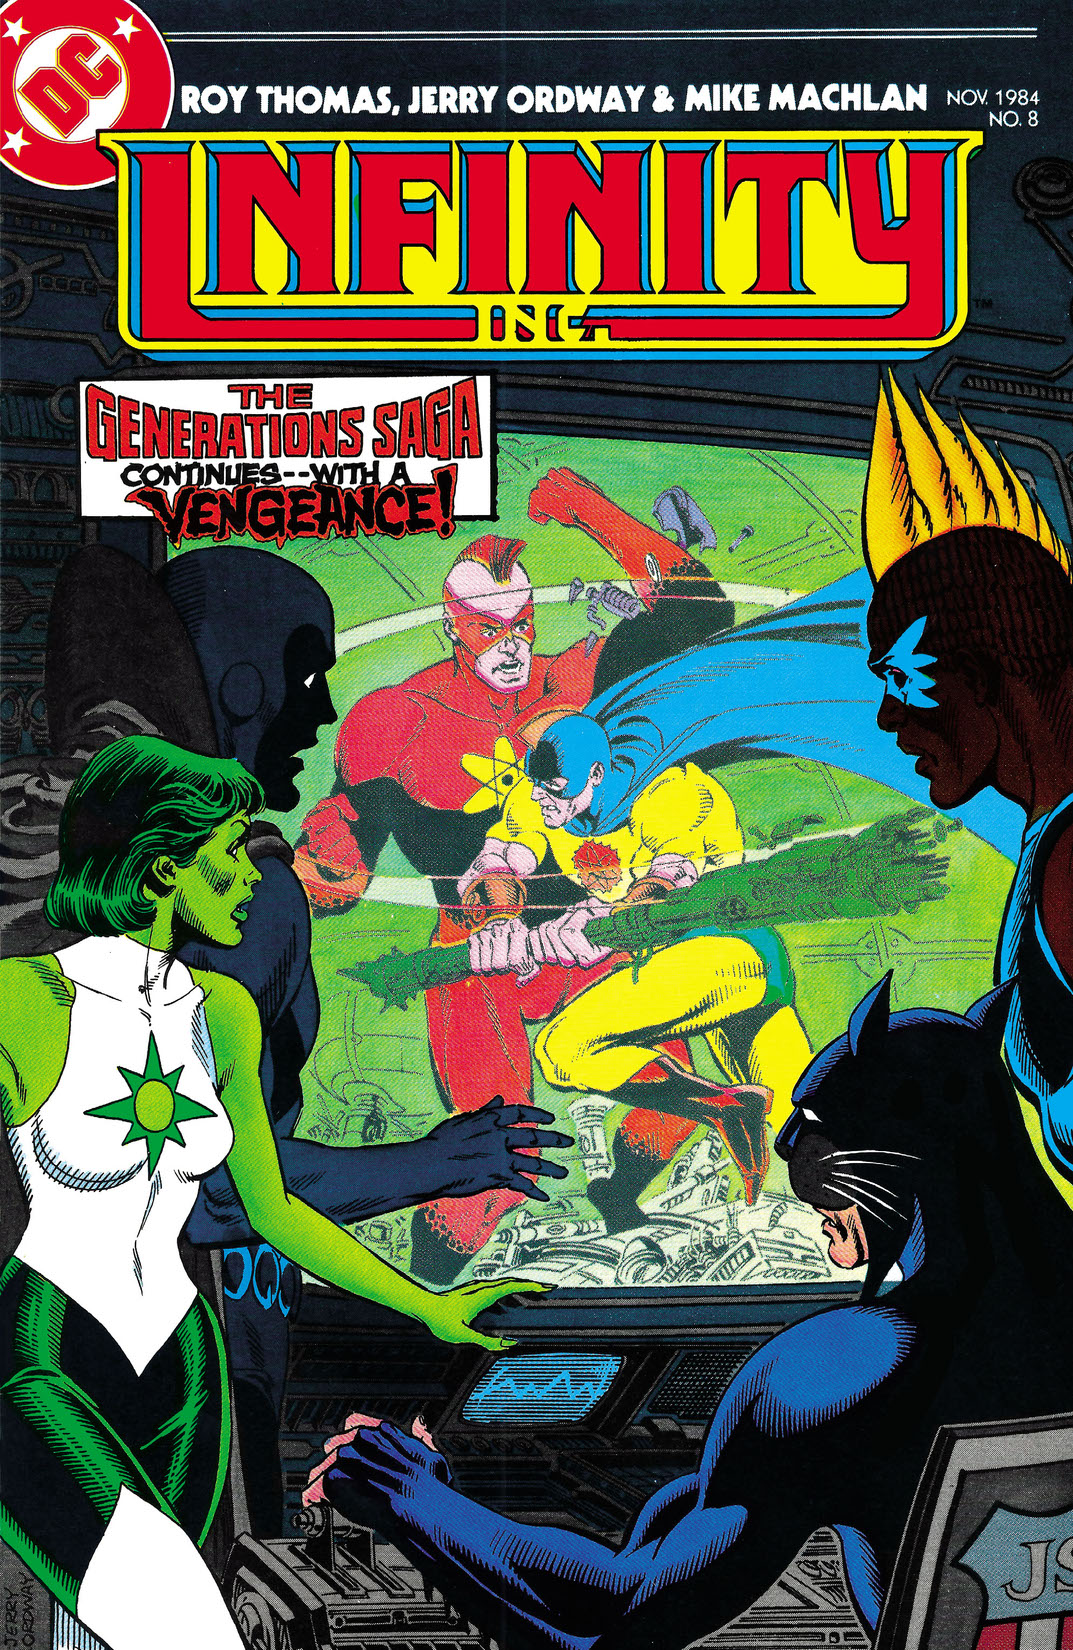 Infinity, Inc. (1984-) #8 preview images